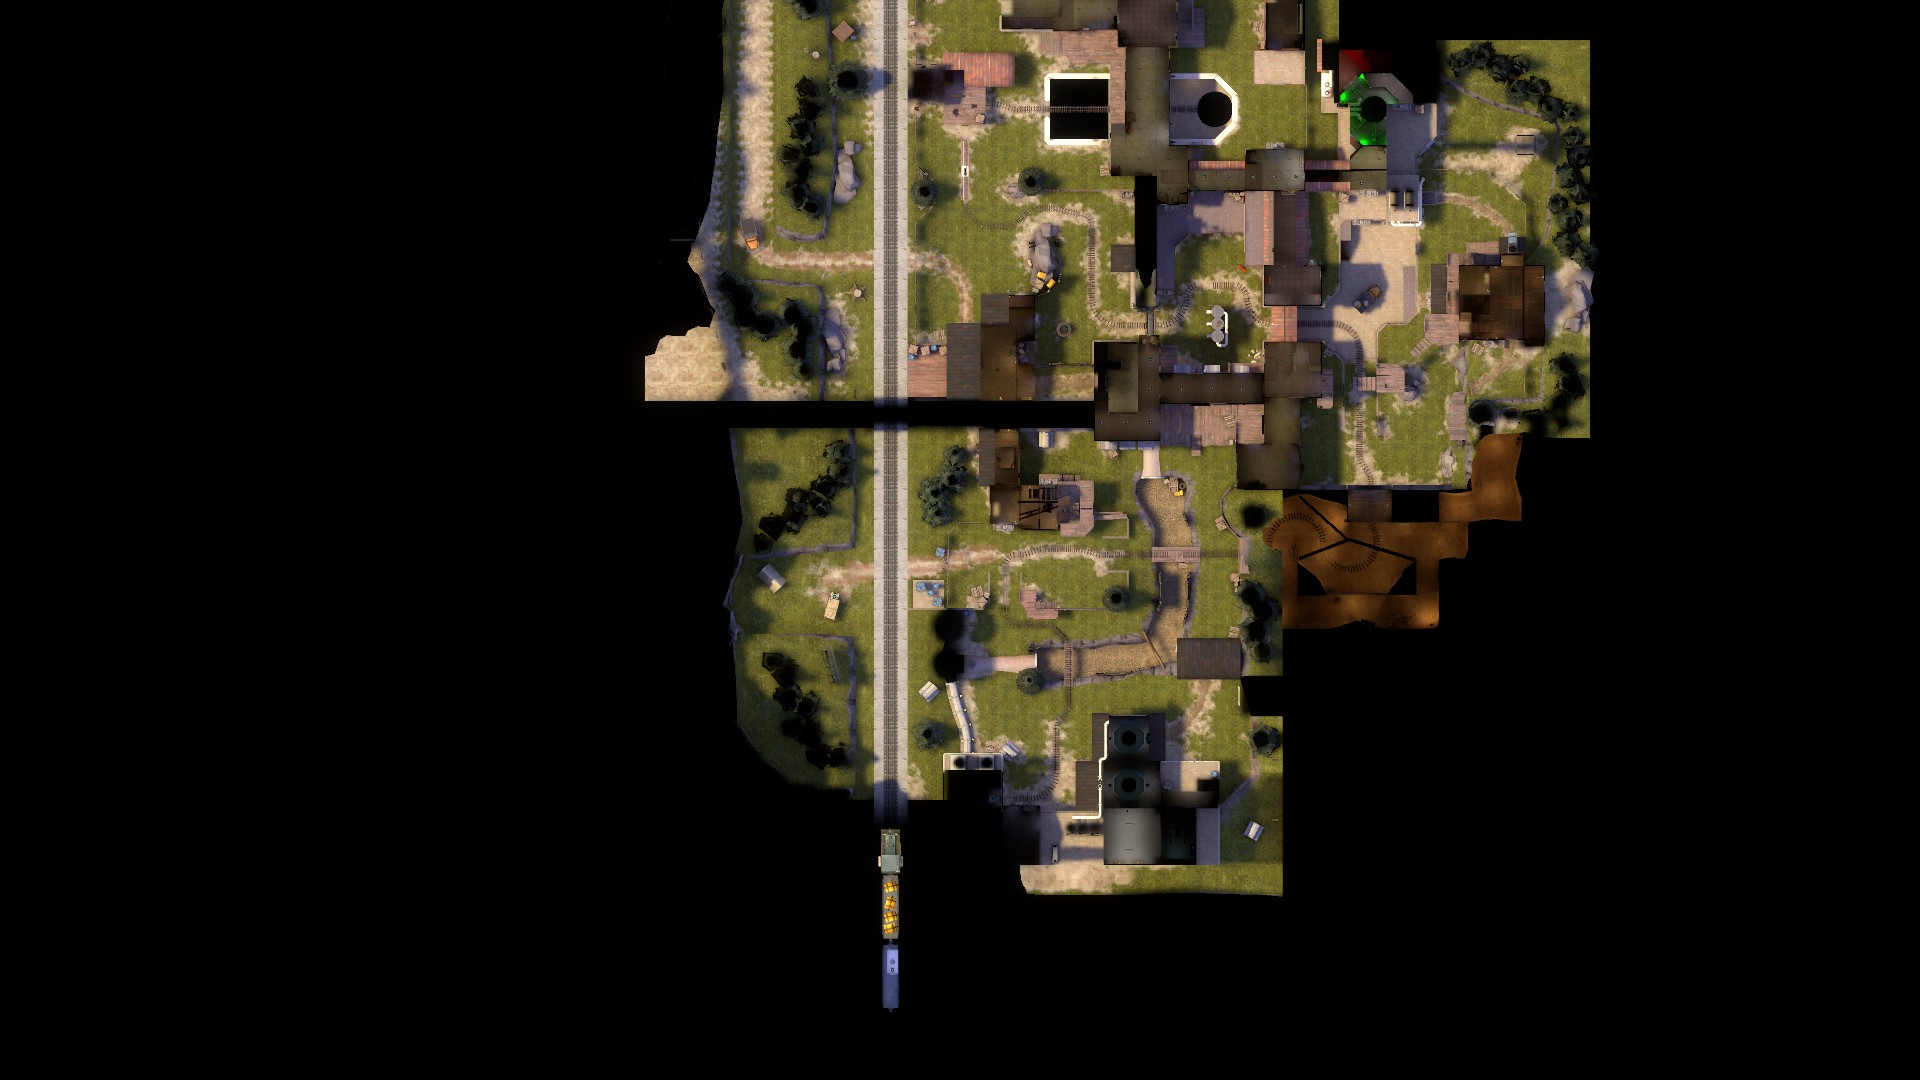 Pl_swiftwater_final1 overview